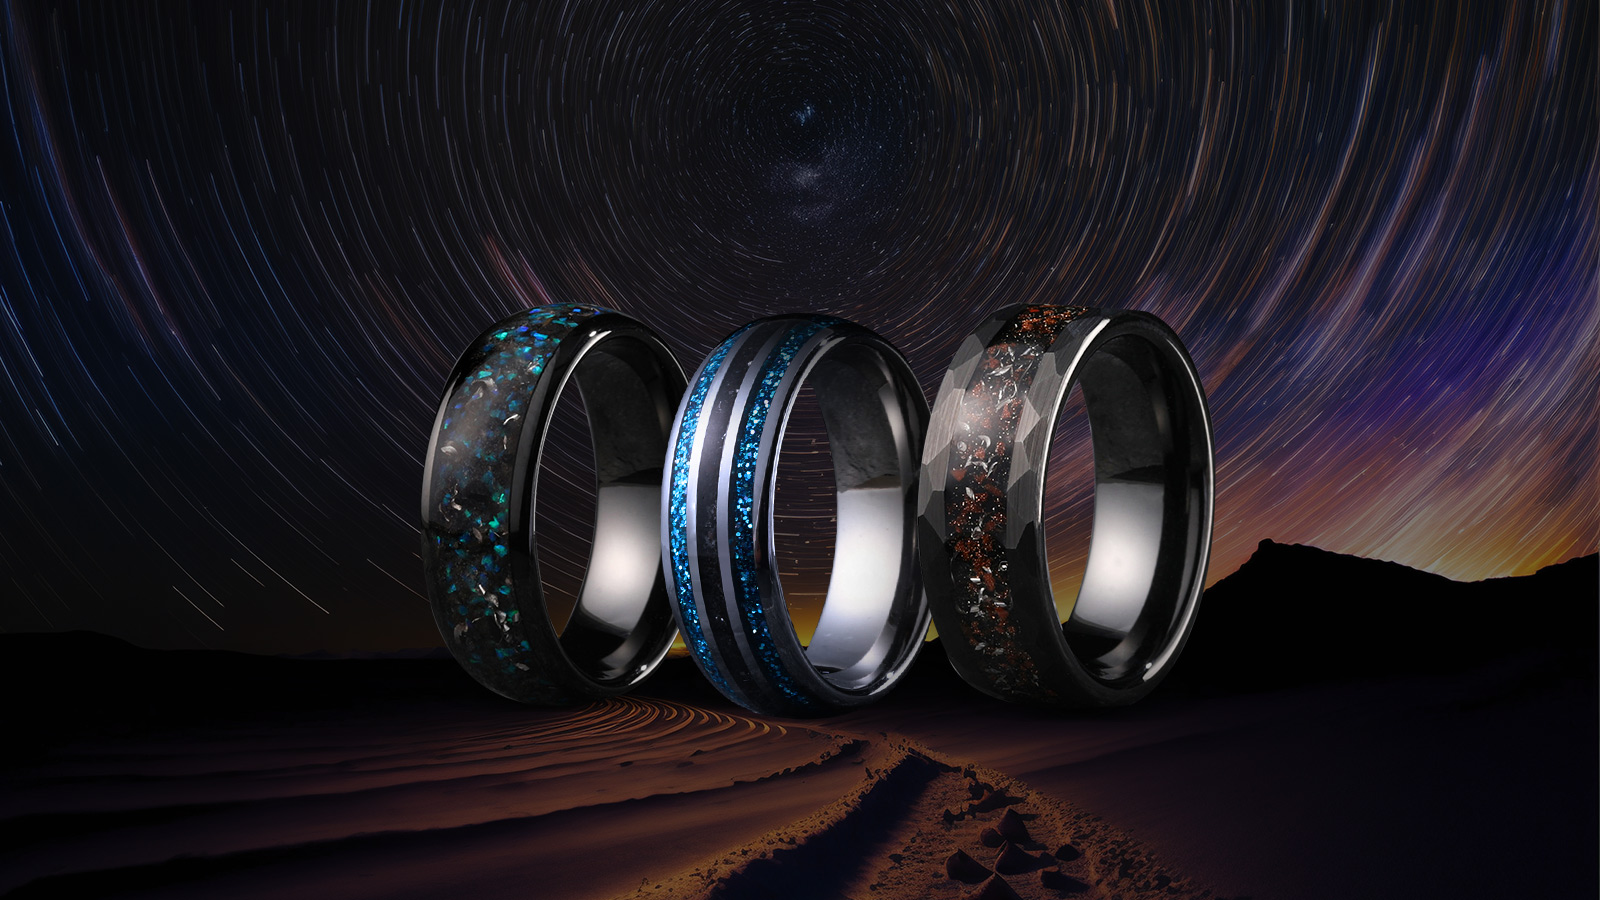 Three meteorite rings, with a blue meteorite ring in the middle and two black meteorite rings next to it